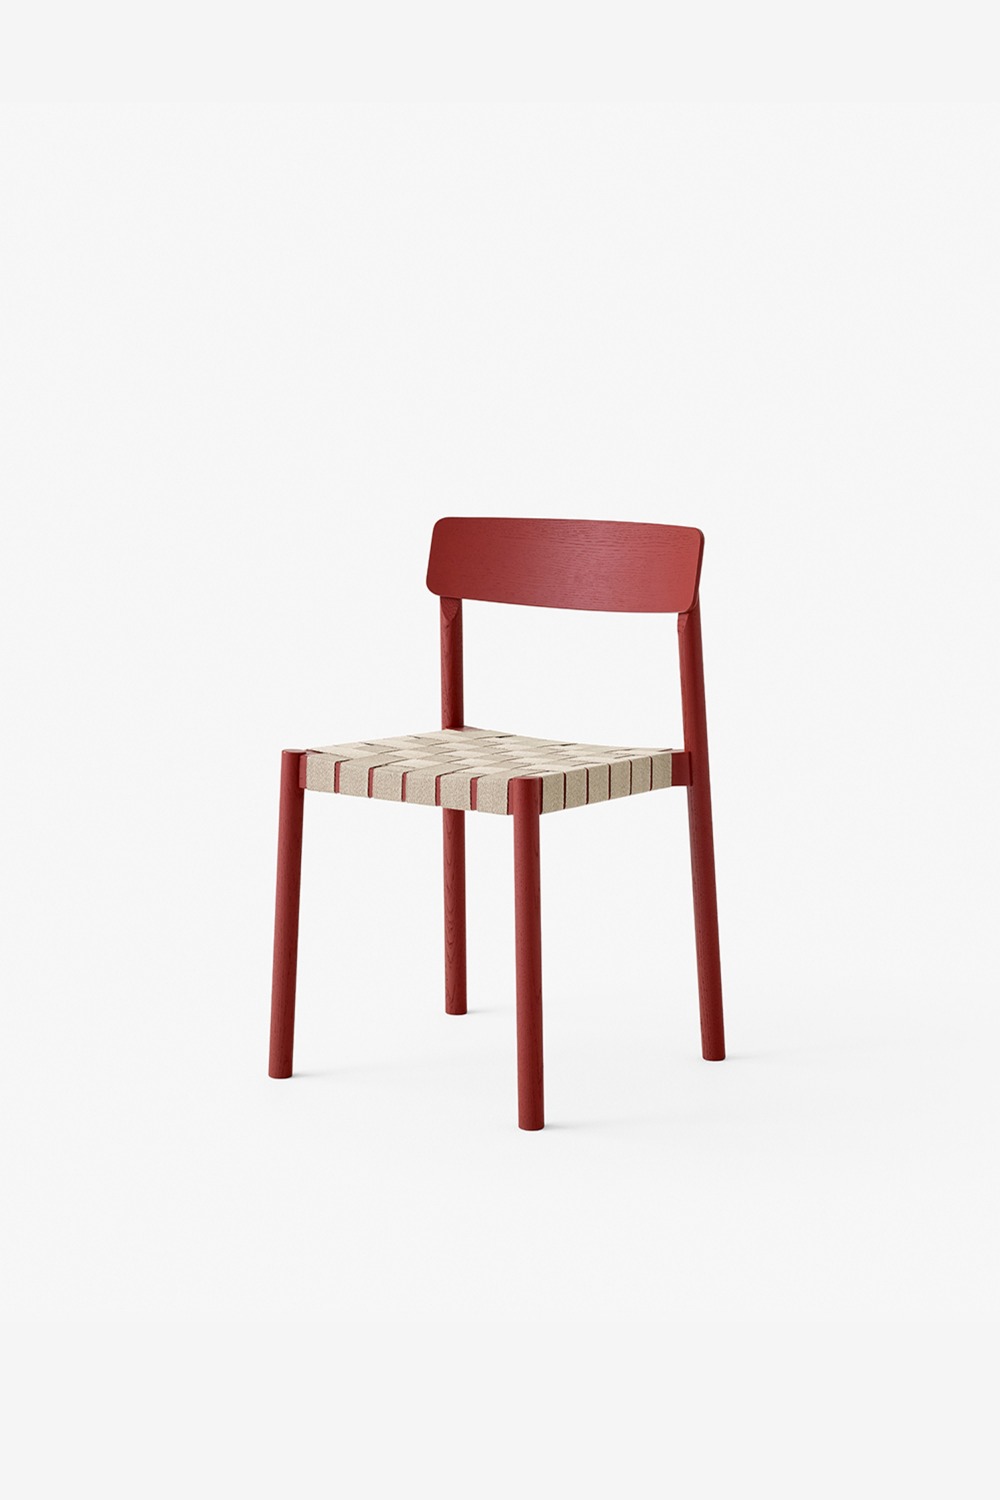 [&amp;Tradition] Betty Chair / TK1 (Maroon)